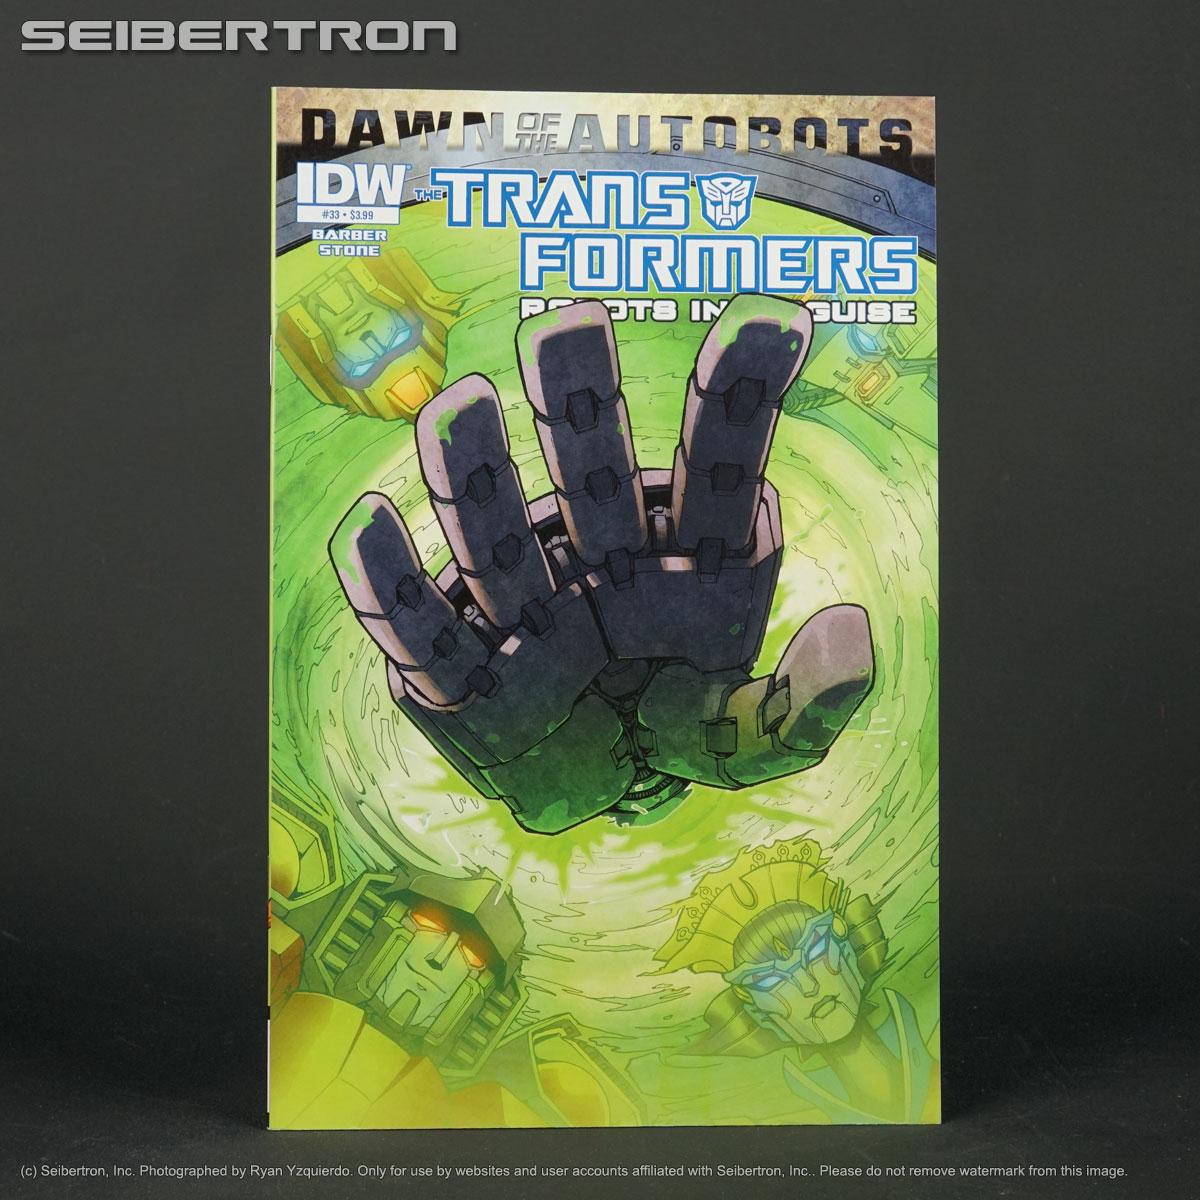 Transformers, Comic Books, Masters of the Universe, Teenage Mutant Ninja Turtles, Gobots, BotBots, Shopkins, and other listings from Seibertron.com: Transformers ROBOTS IN DISGUISE #33 IDW Comics 2014 Dawn of Autobots 200211b